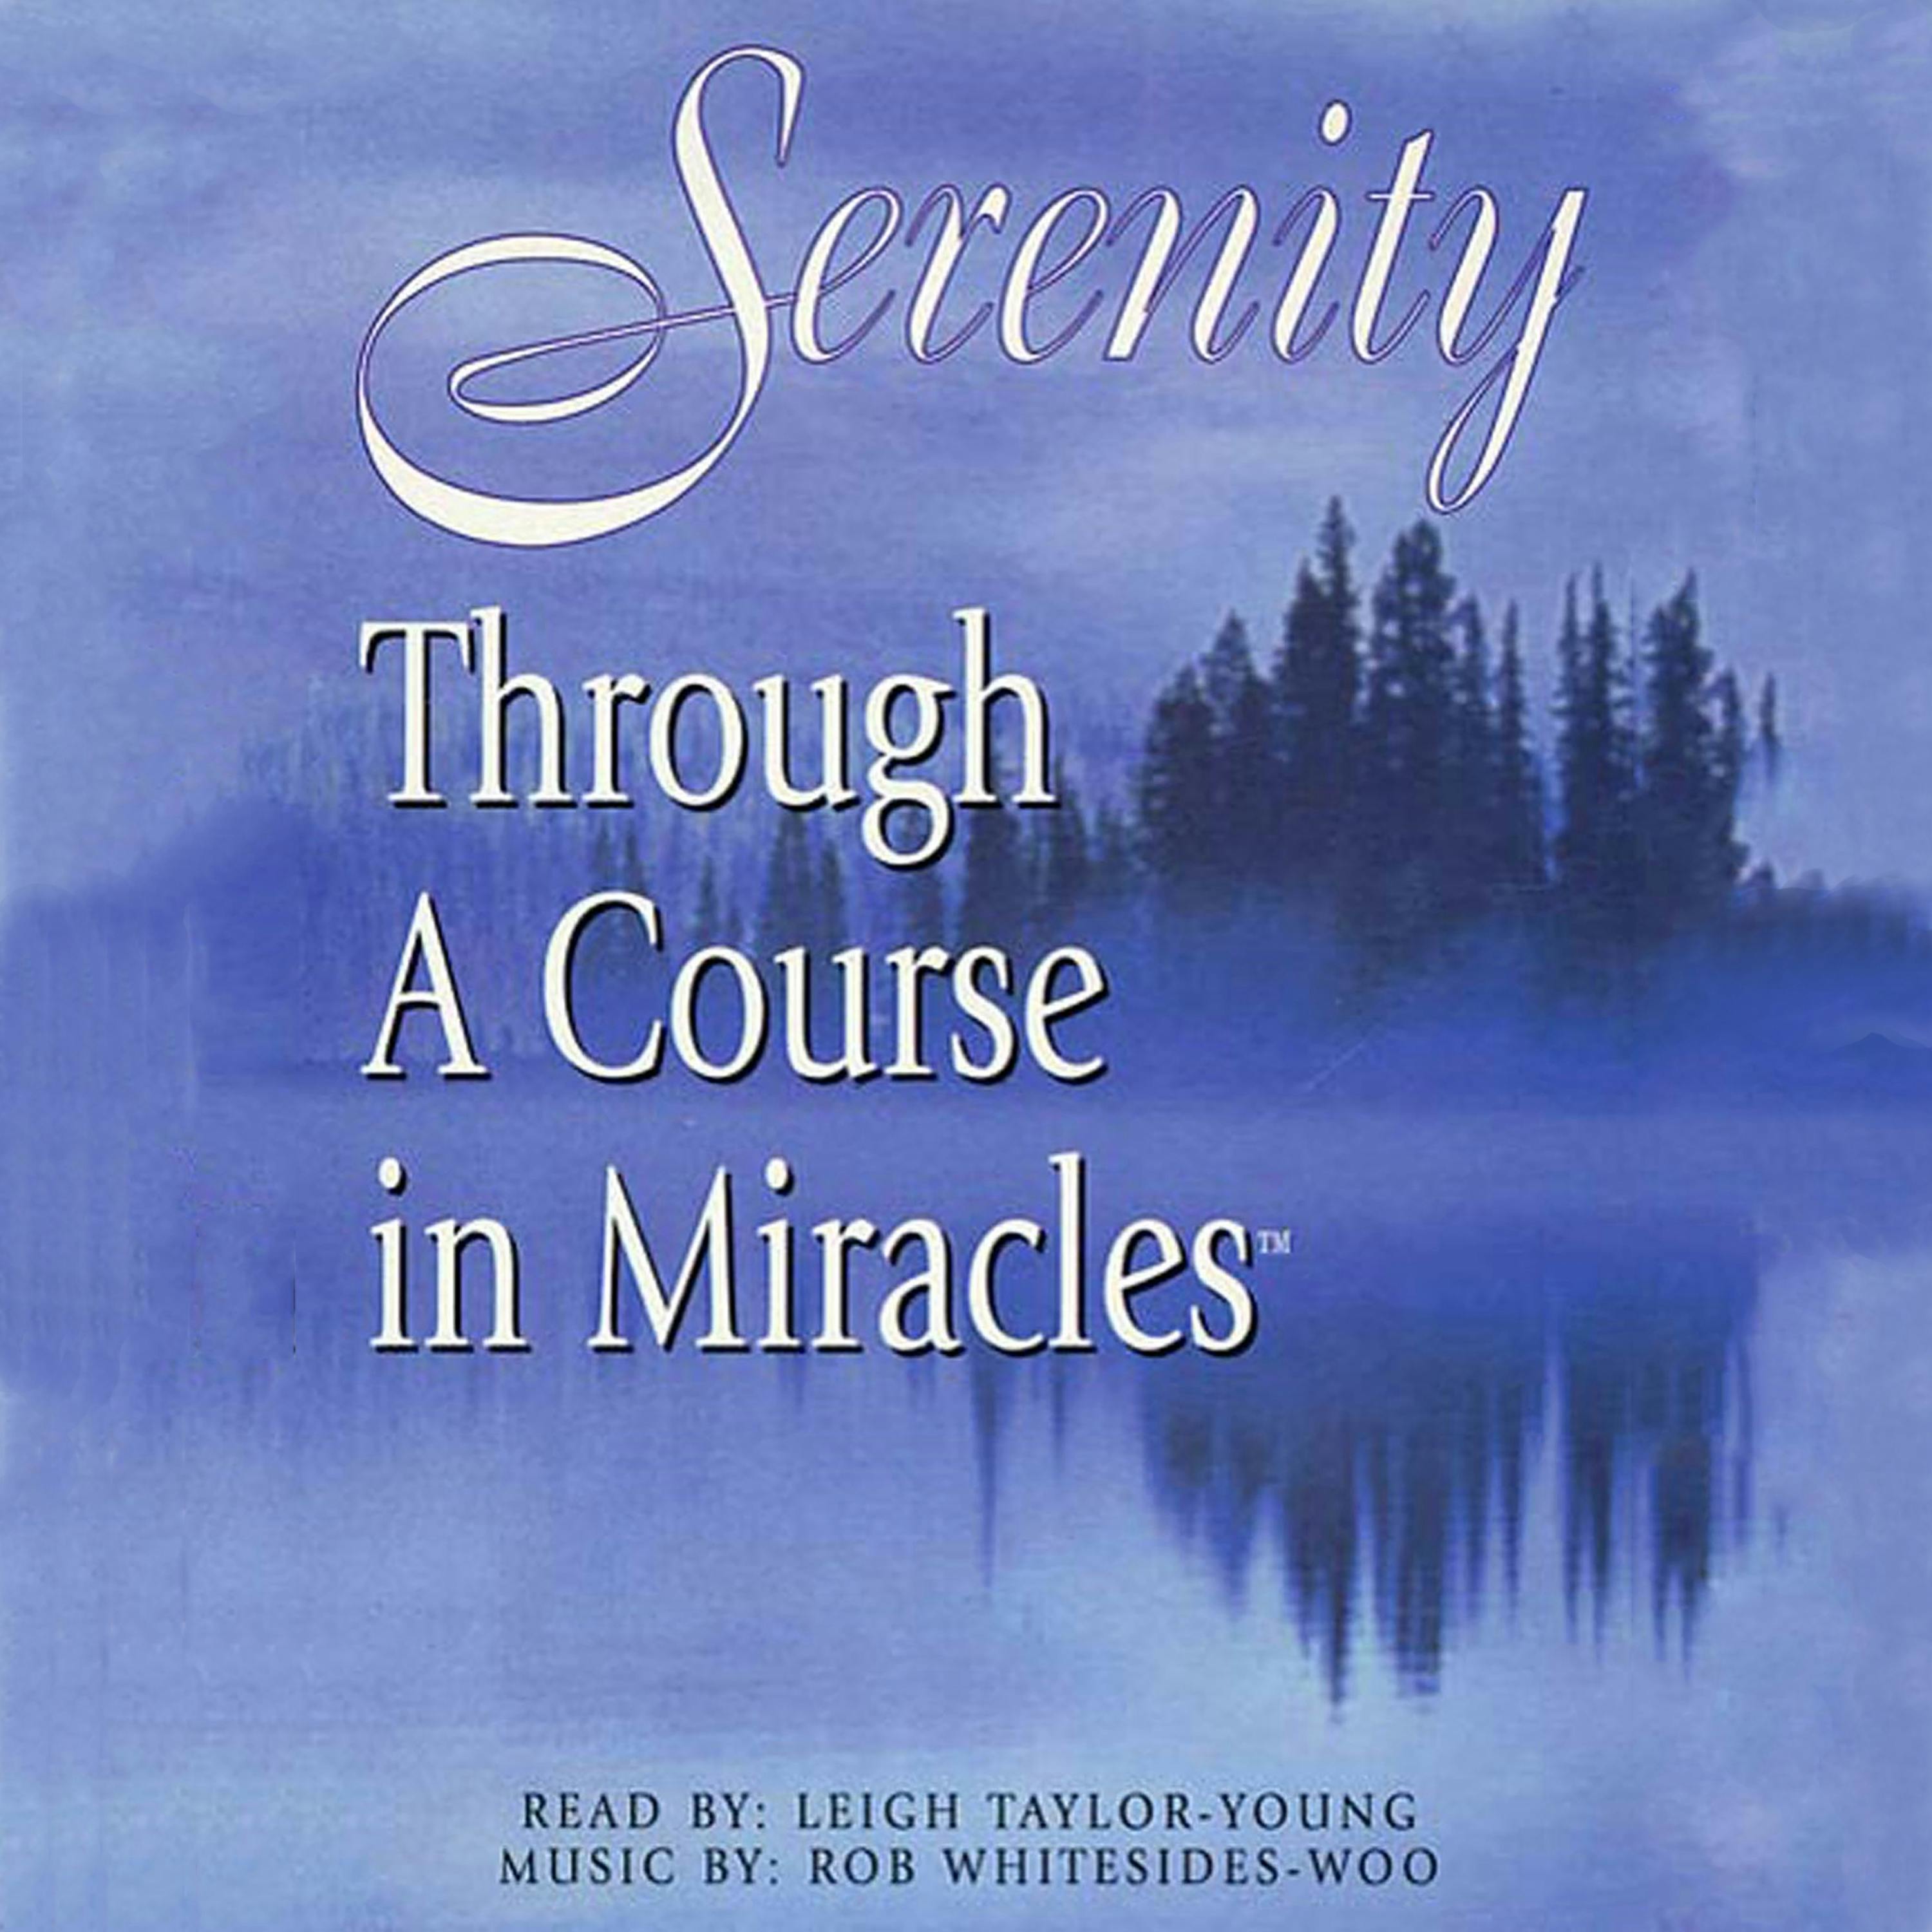 Serenity Through A Course in Miracles